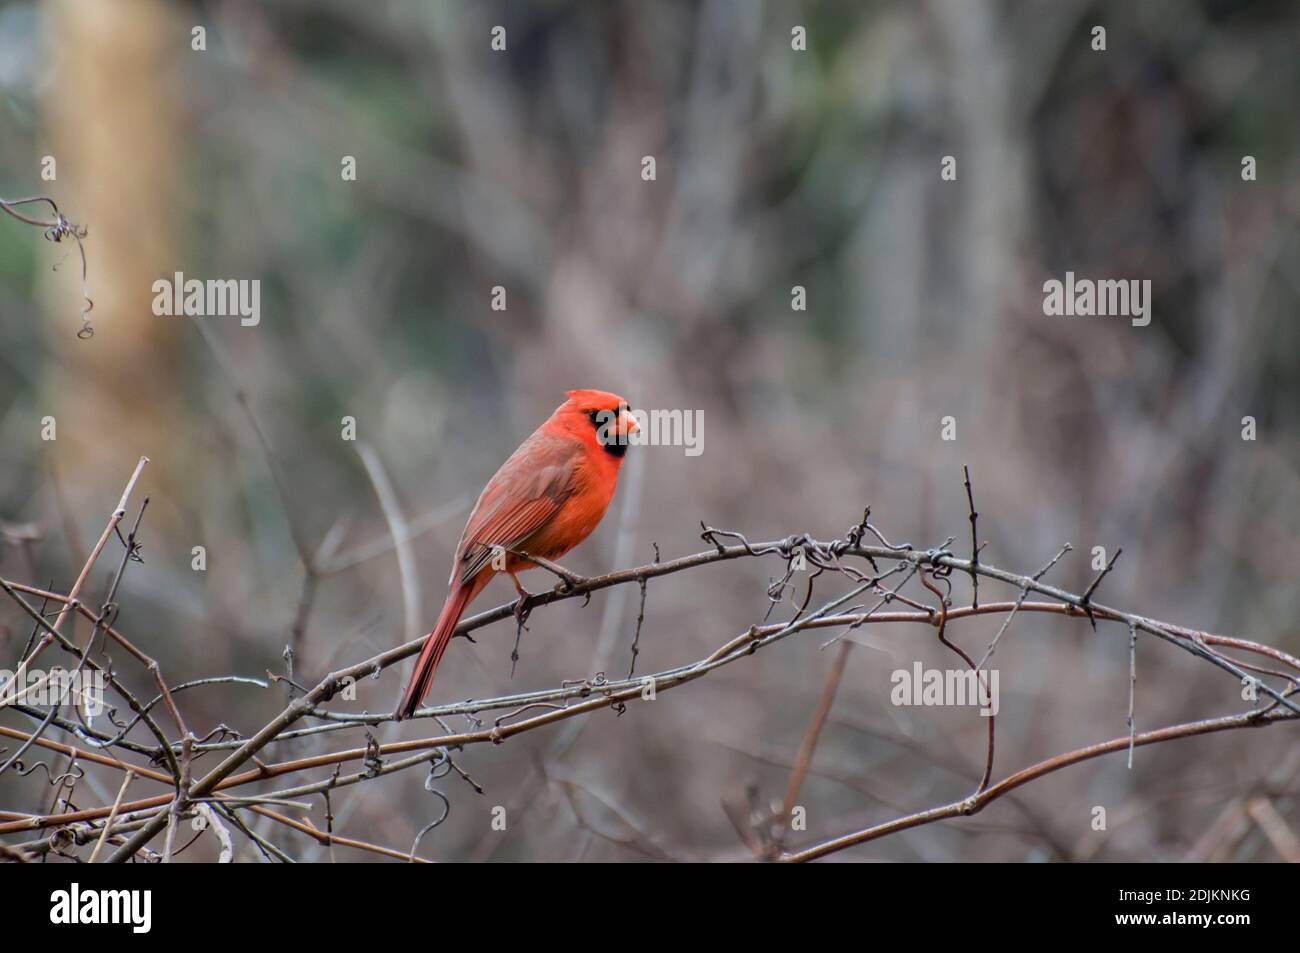 Vadnais Heights, Minnesota.  John H. Allison forest. Male Northern Cardinal, Cardinalis cardinalis, sitting on a        branch in the forest. Stock Photo